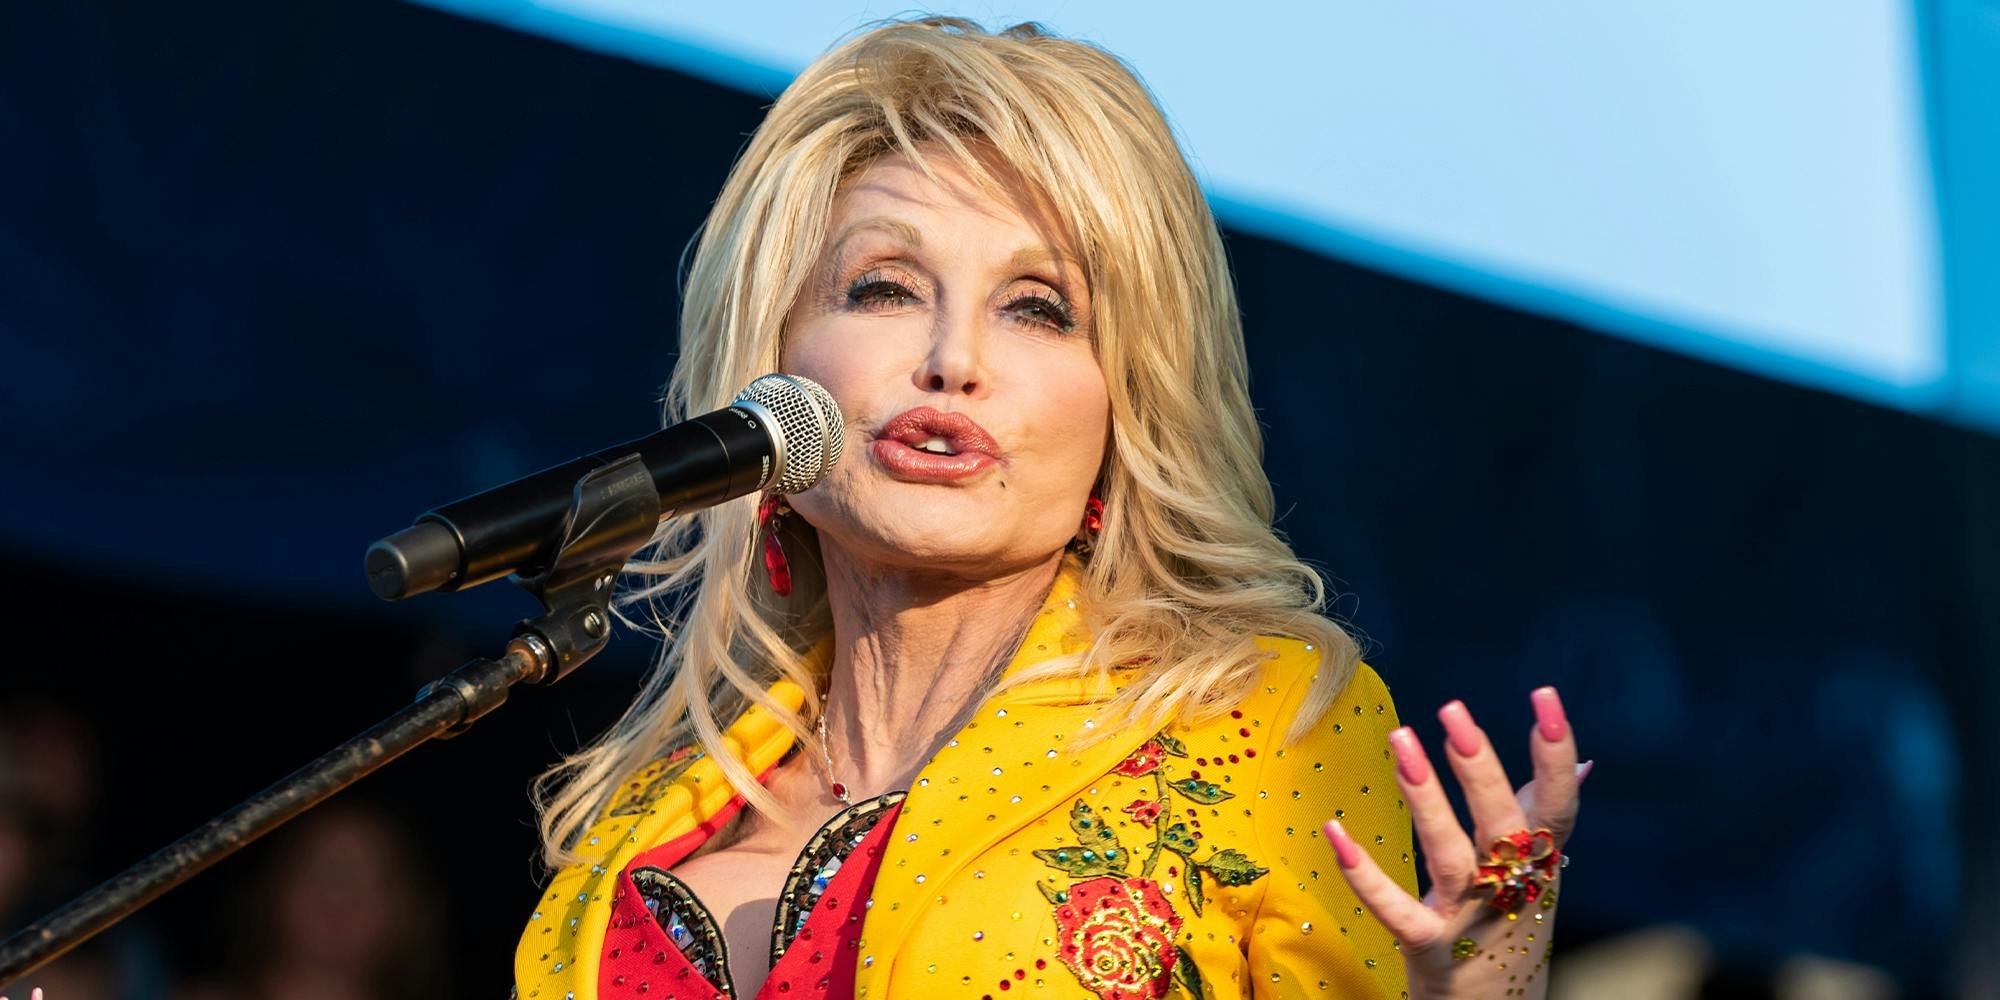 'Horrific crimes against humanity': Anti-vaxxers are going after Dolly Parton after Dallas Cowboys performance